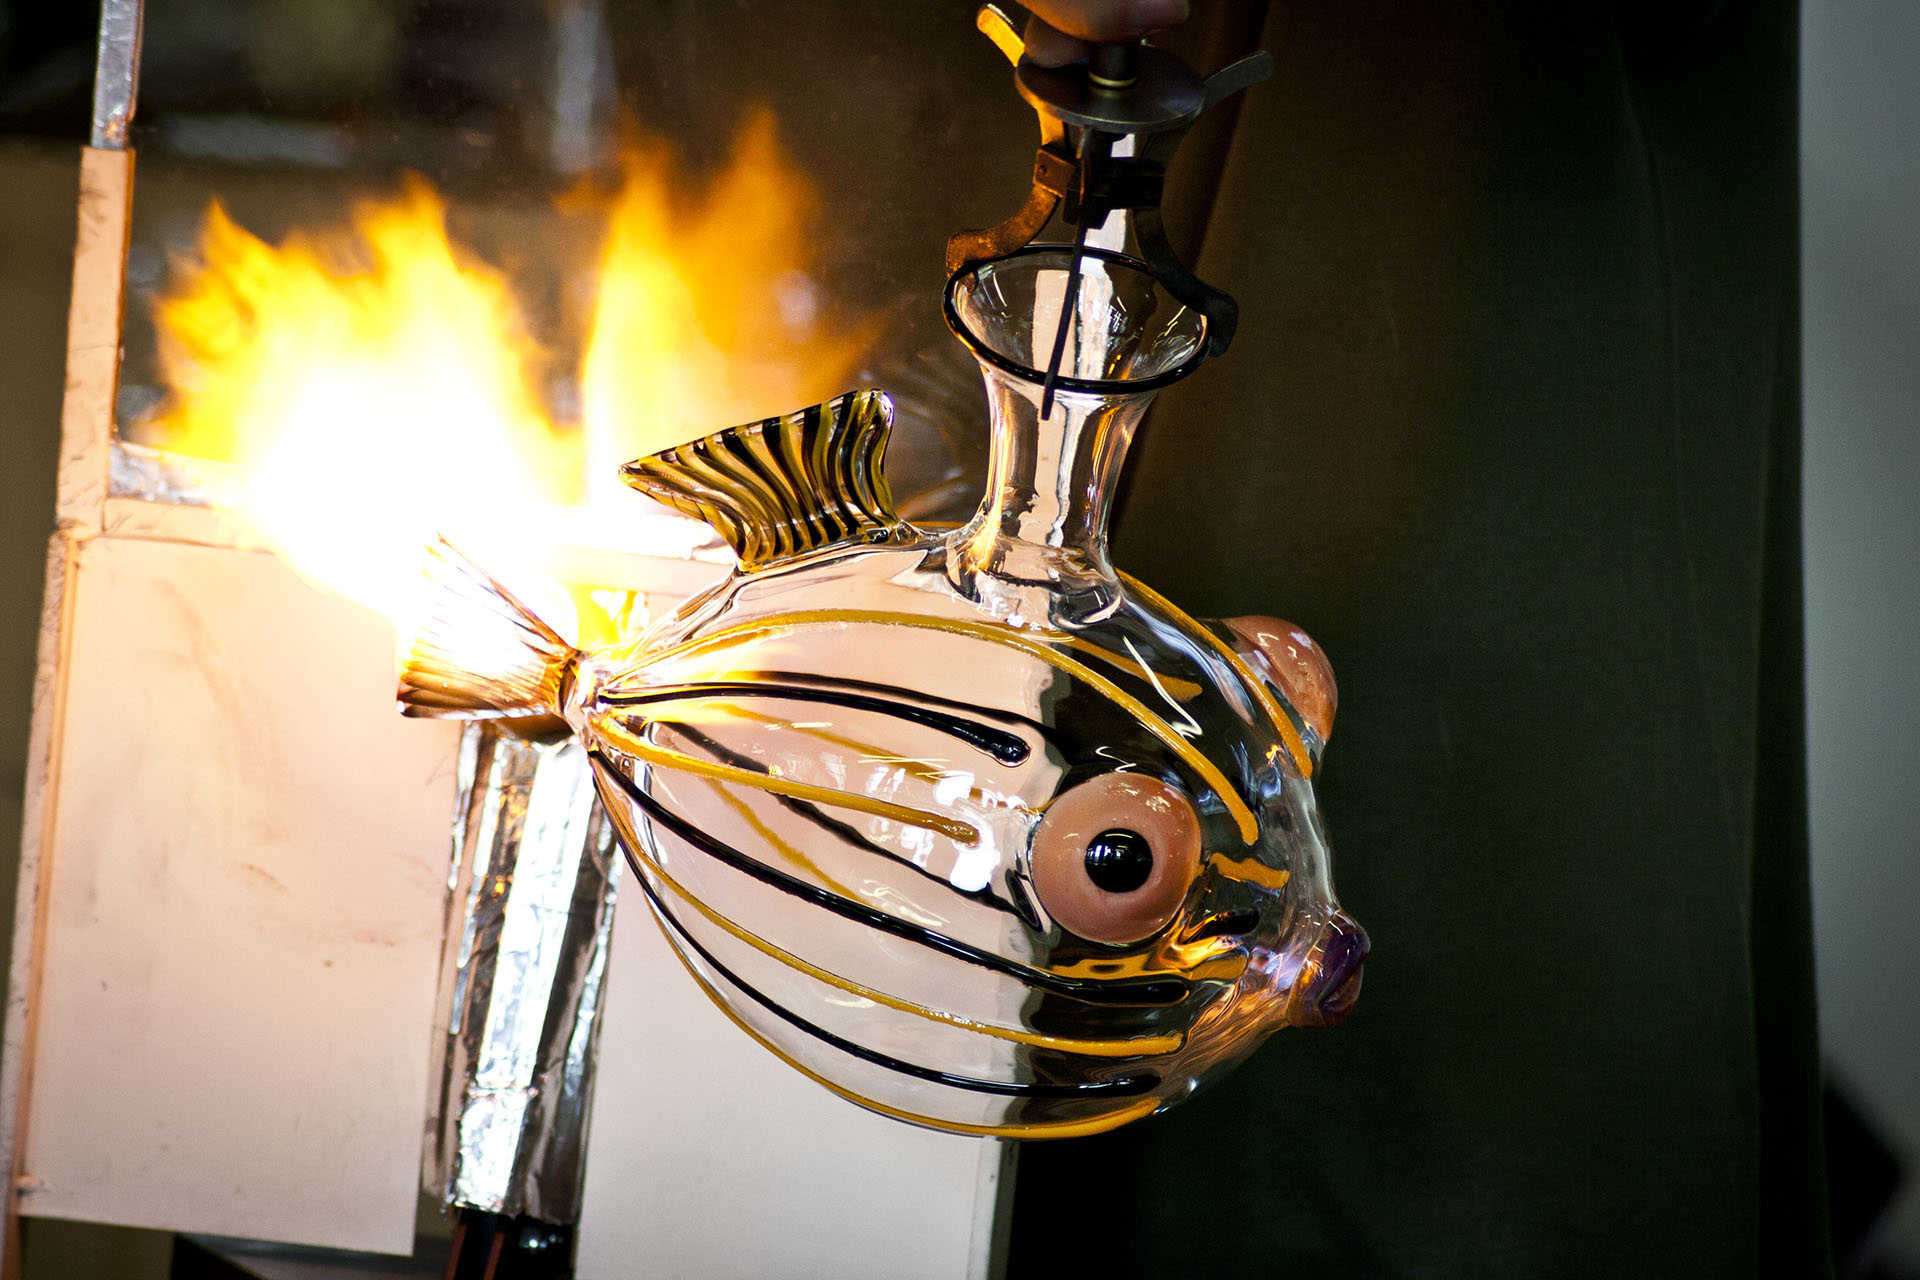 Massimo Lunardon - Cardinal, single decanter made of borosilicate glass and worked by hand with lamp-blowing technique